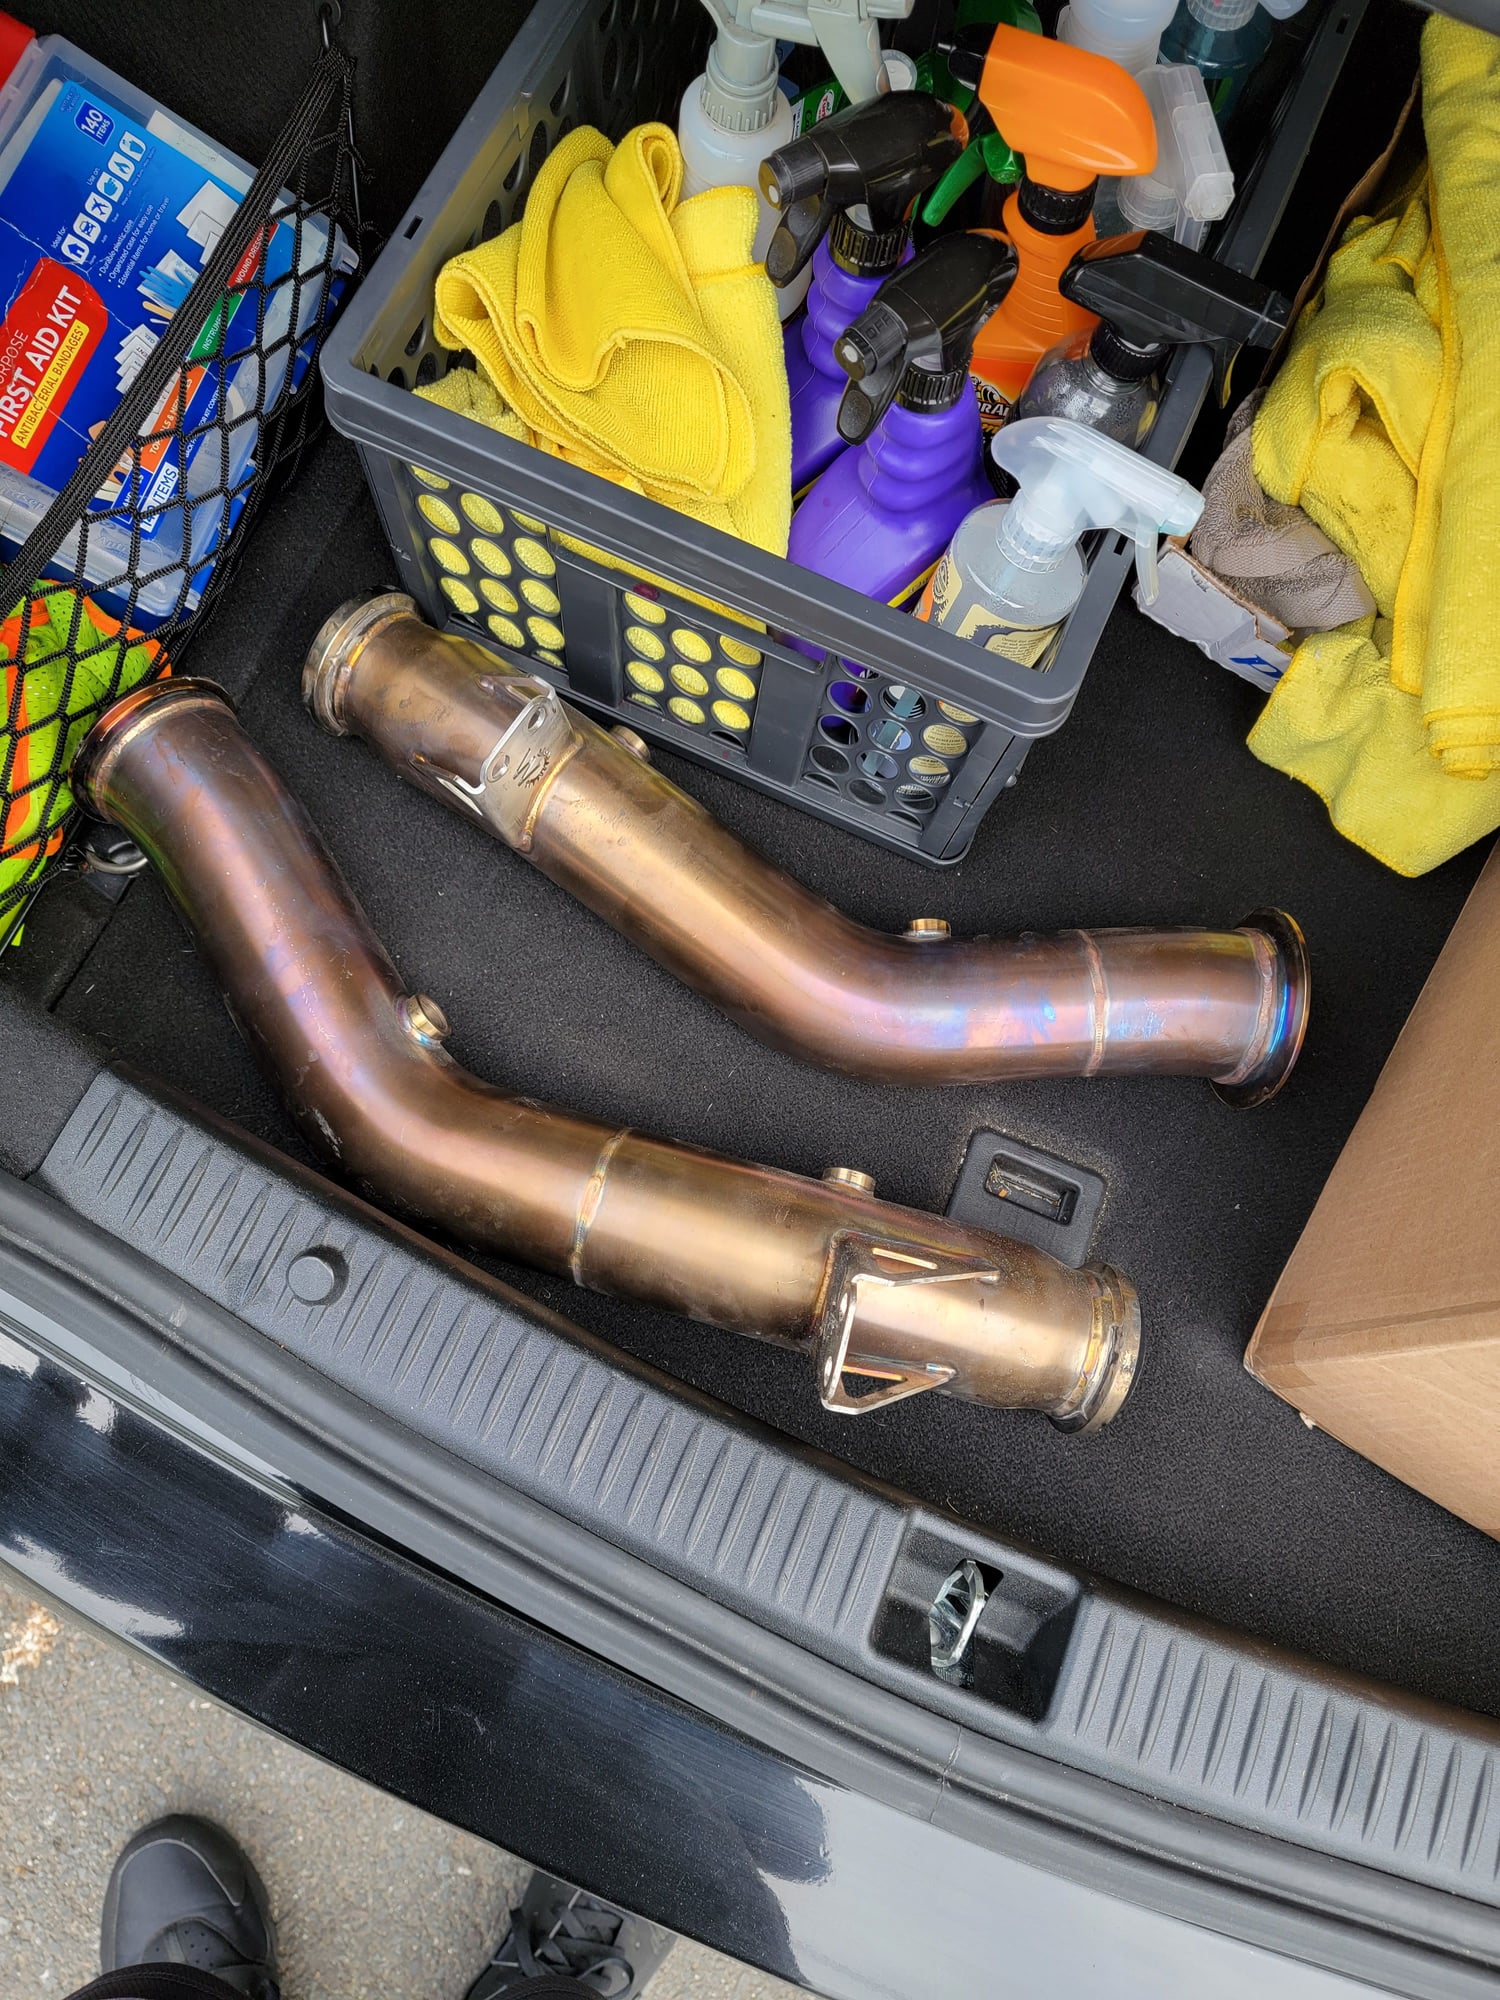 Engine - Exhaust - Weistec downpipes c43 - Used - 2016 to 2021 Mercedes-Benz C43 AMG - Somerville, NJ 08876, United States